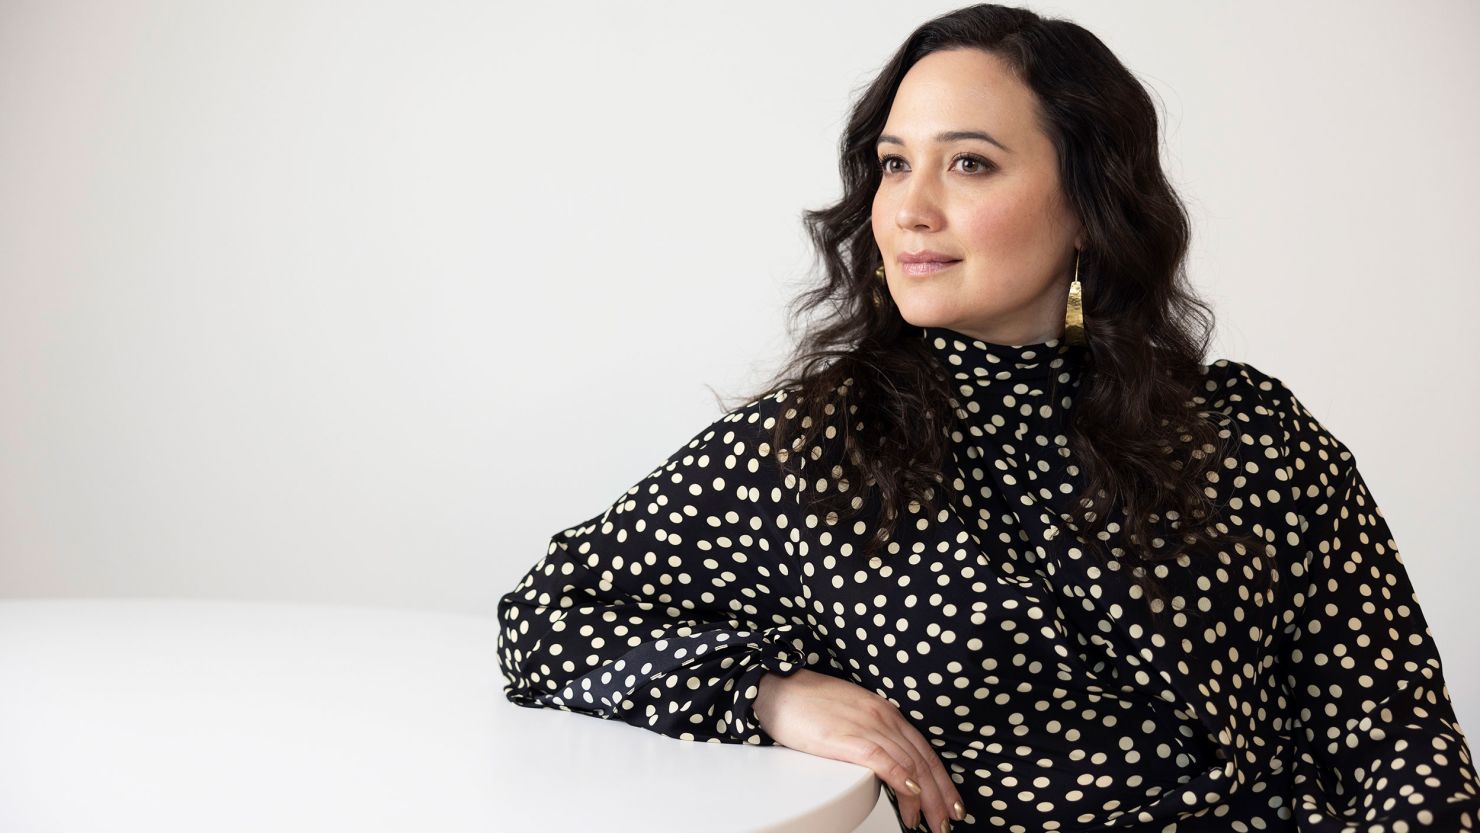 “Killers of the Flower Moon” star Lily Gladstone began working with the National Indigenous Women’s Resource Center (NIWRC) in 2011, leading youth acting workshops.